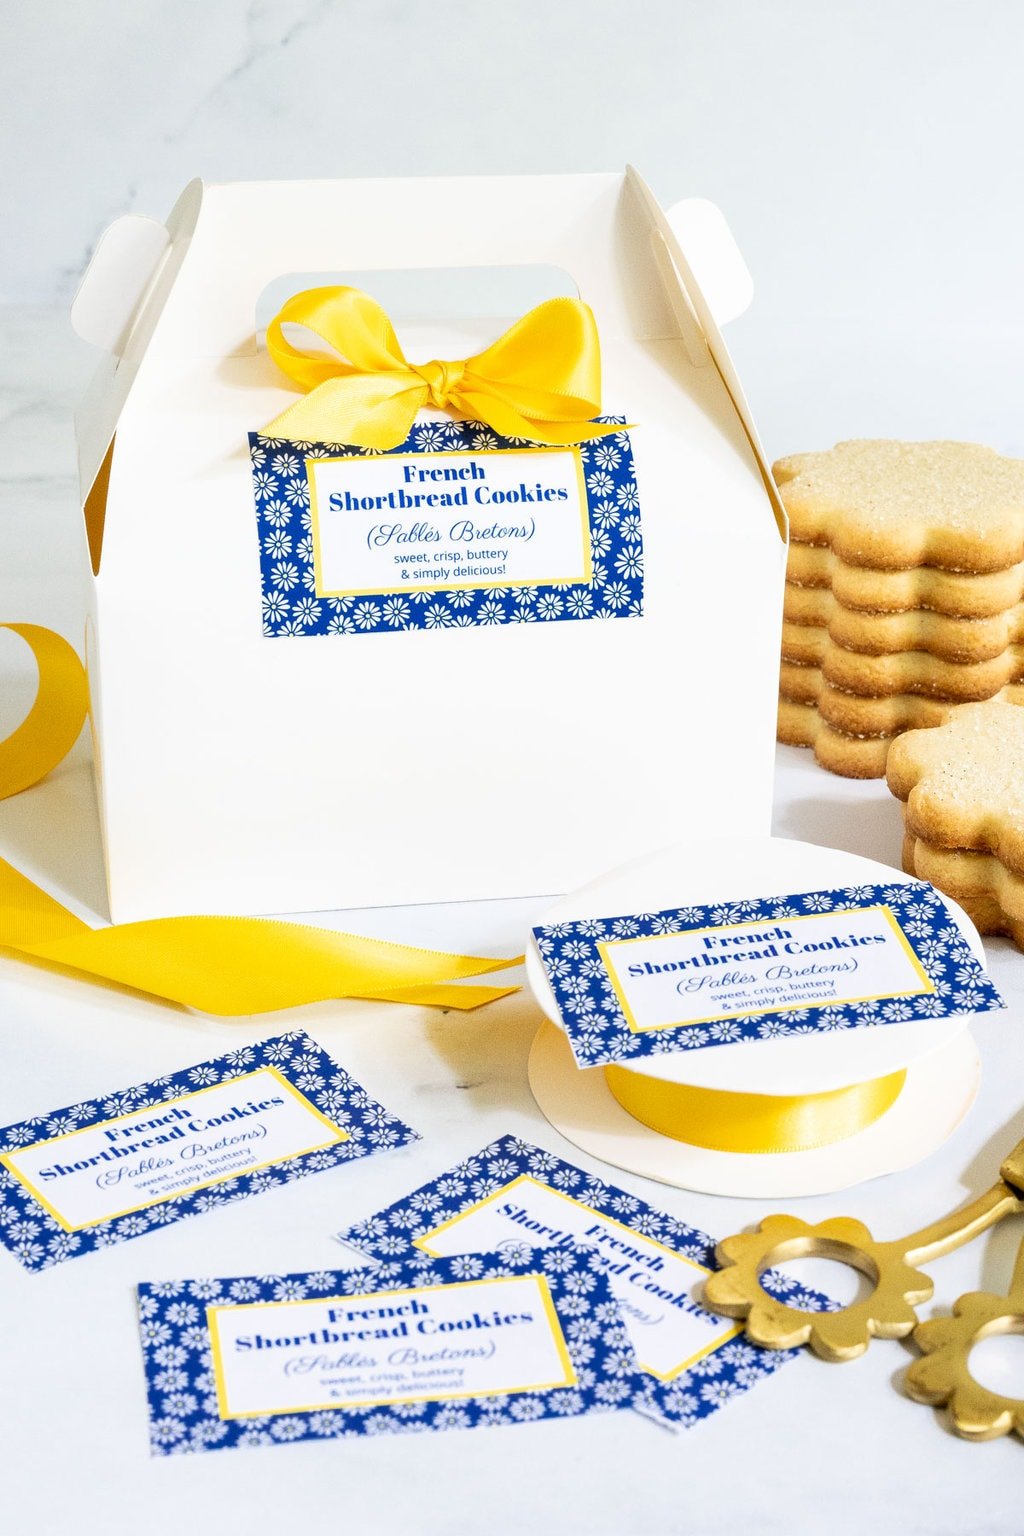 Vertical photo of gift boxes and custom gift labels for French Shortbread Cookies (Sablés Bretons).